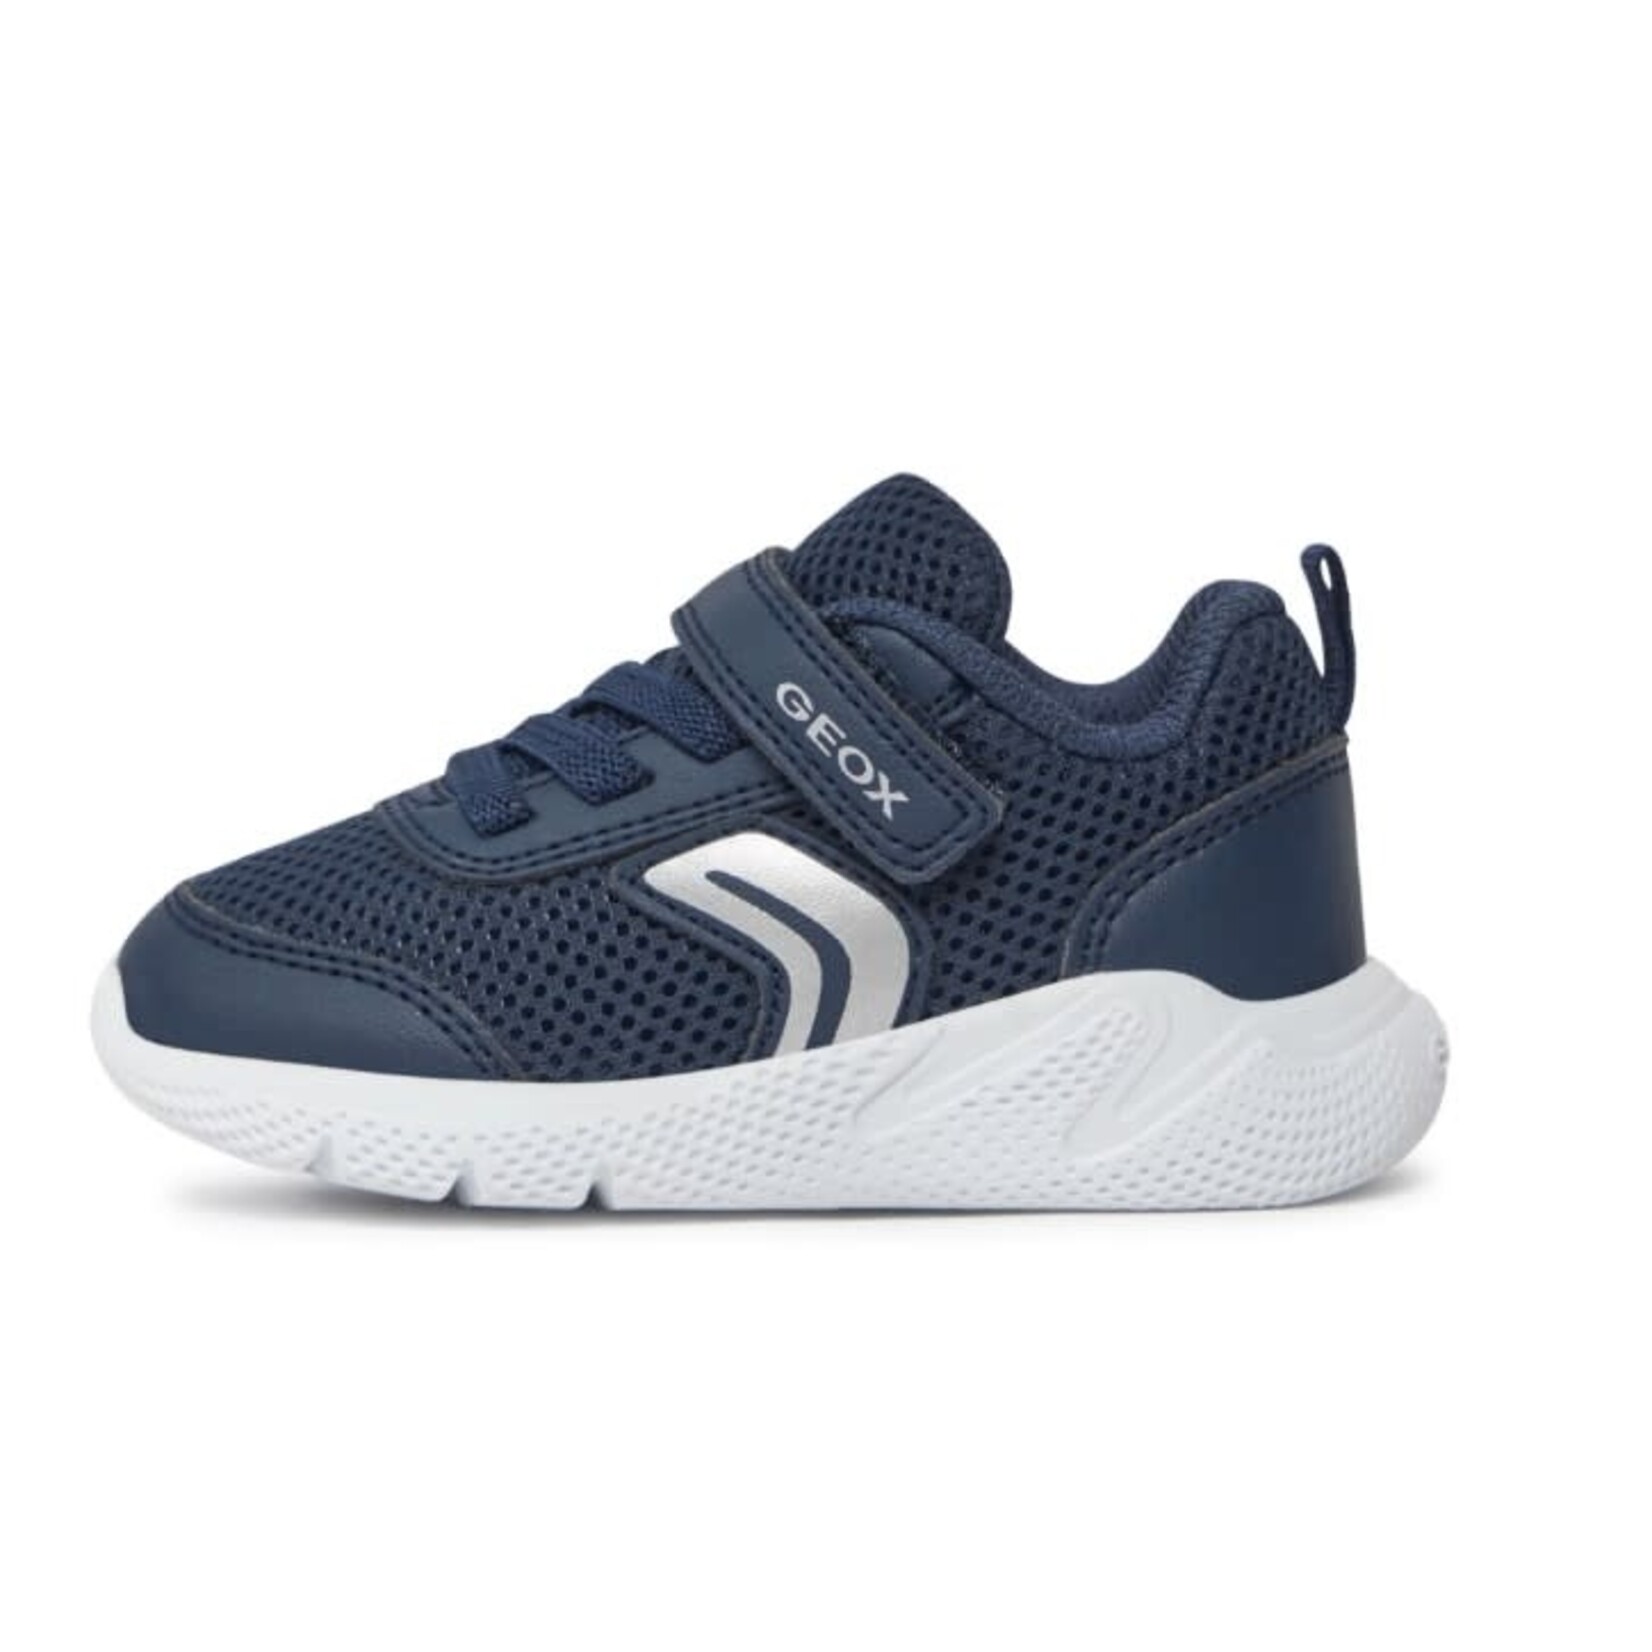 Geox  GEOX - Navy Running Shoes for Toddlers 'Sprintye - Navy'